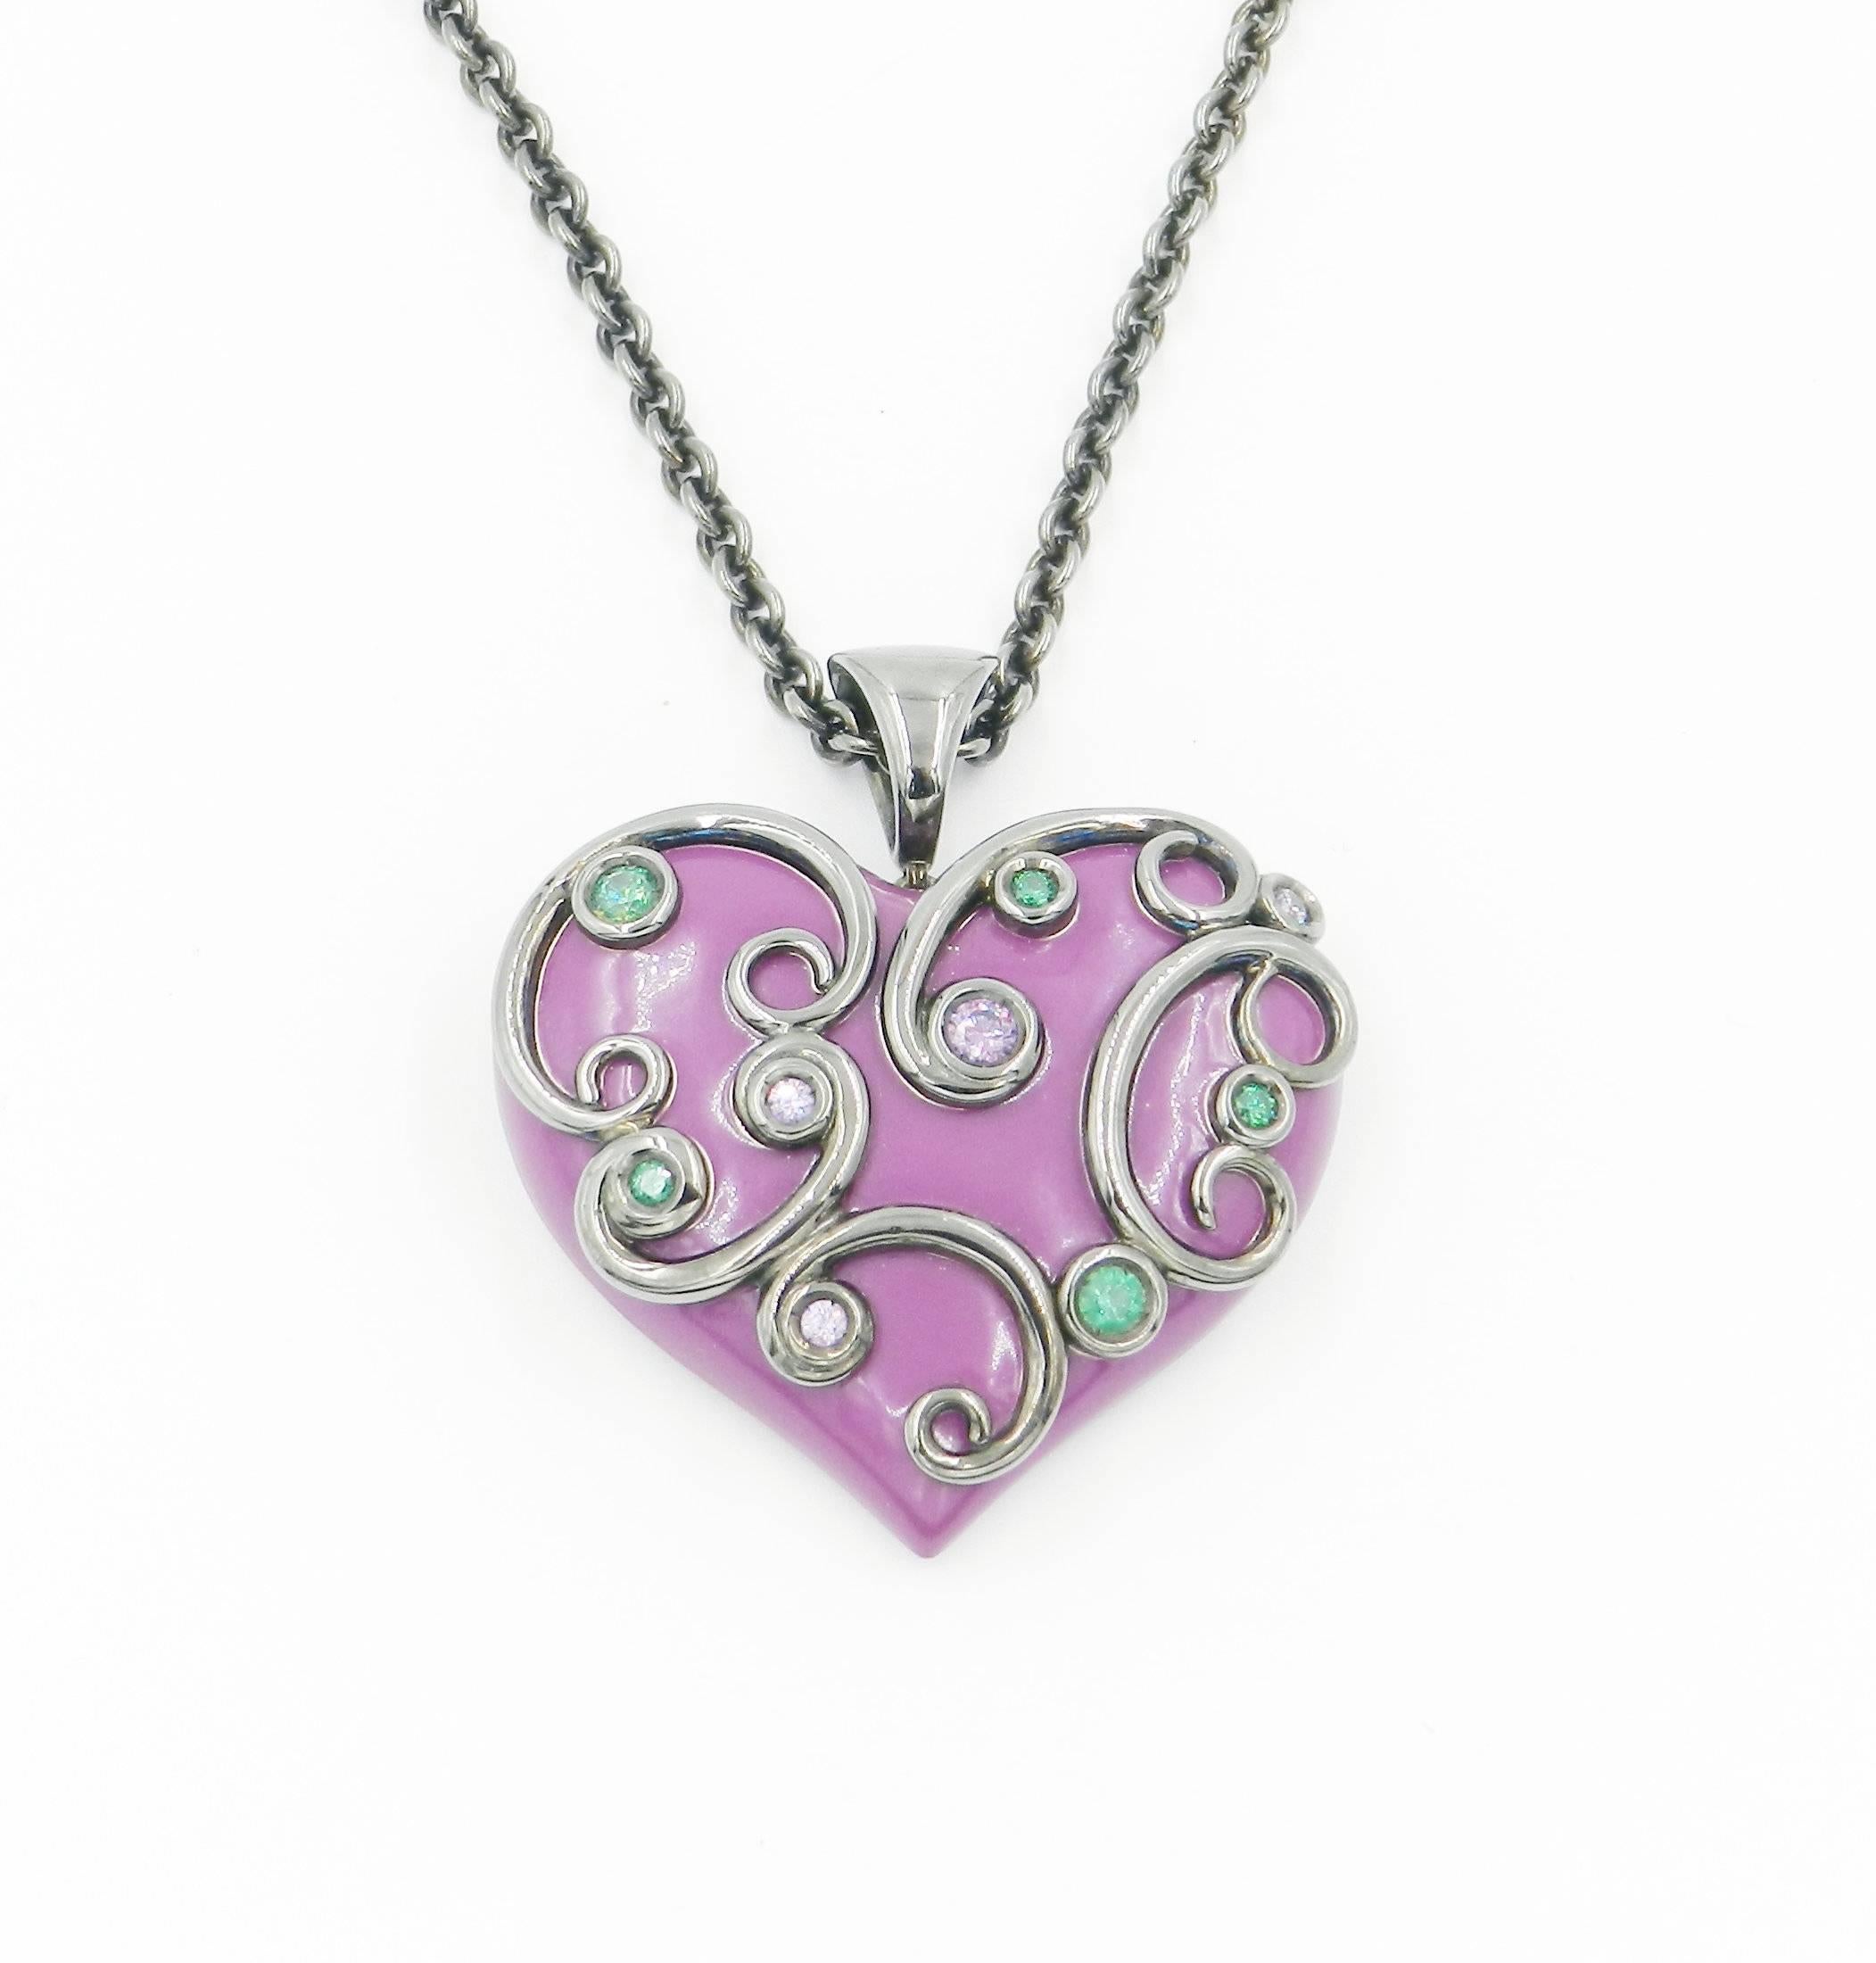 Originally designed across the millenium this fabulous chain with pendant is in silver and features a total of 1.00 carat of tzavorite and amethyst. The pendant size is mm 40 x 35. The chain lenght is 50 cm. Handcrafted in Italy, from the Garavelli